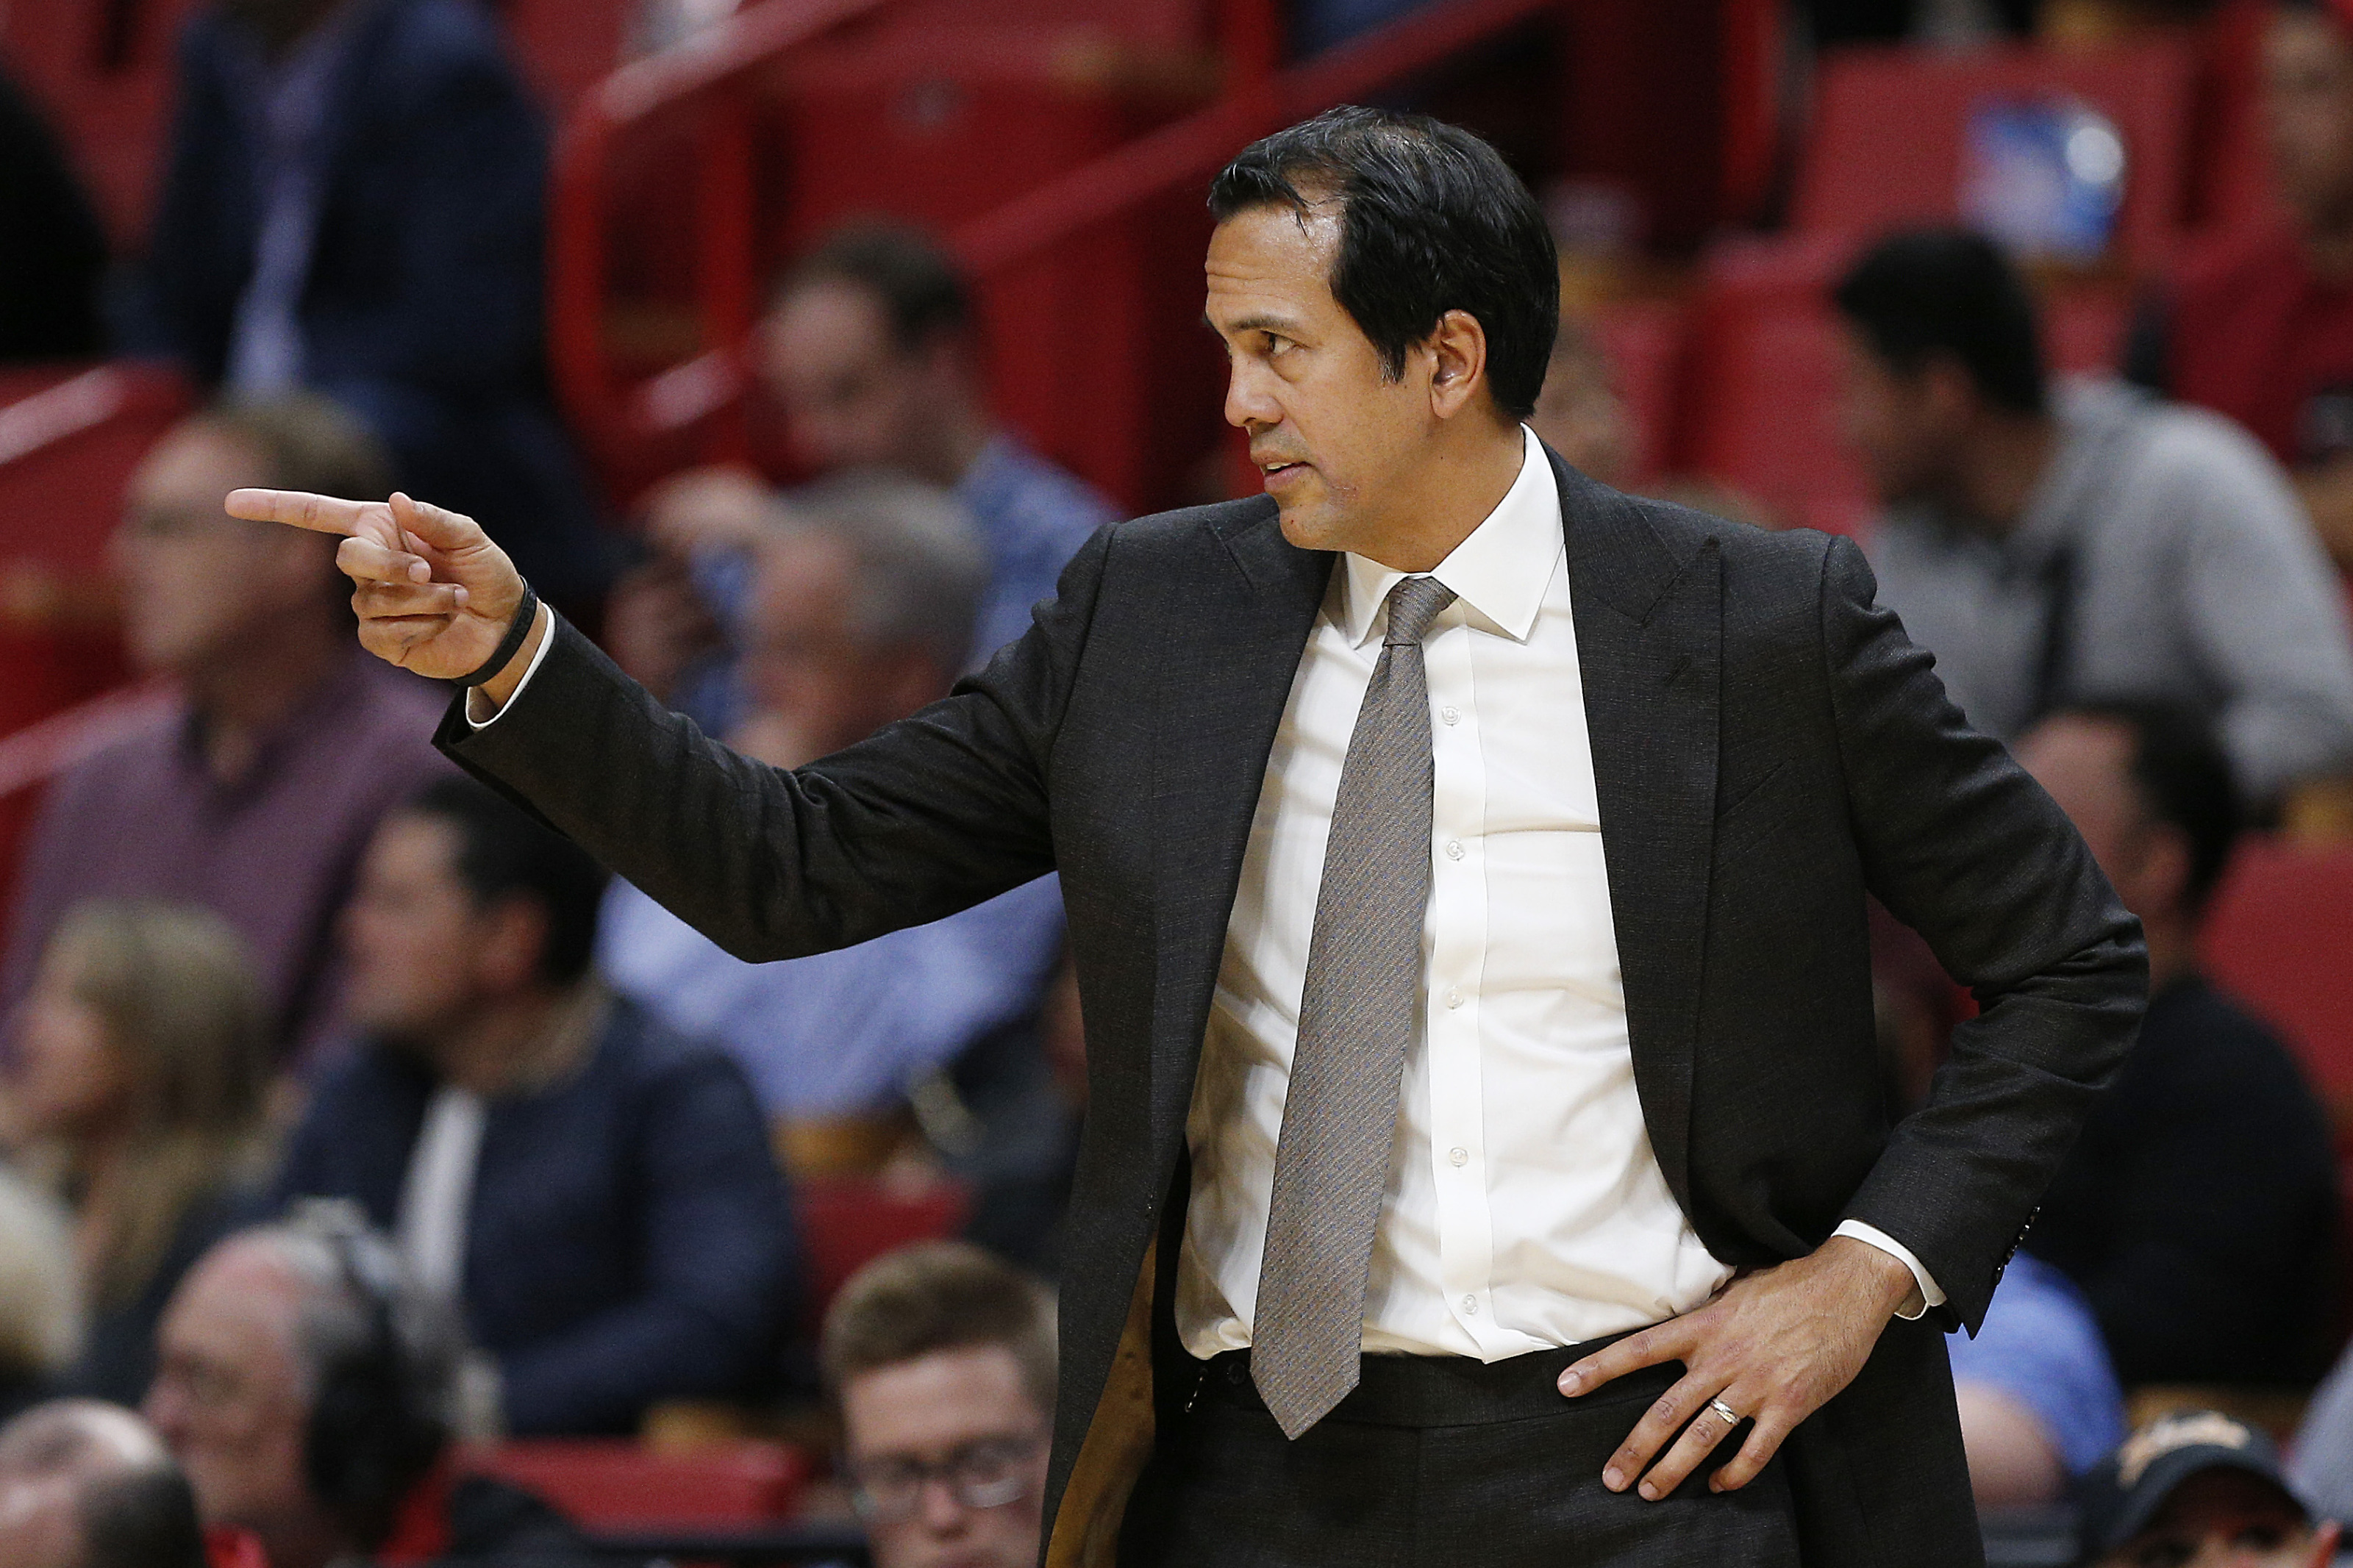 Time for Heat coach Erik Spoelstra to get his due